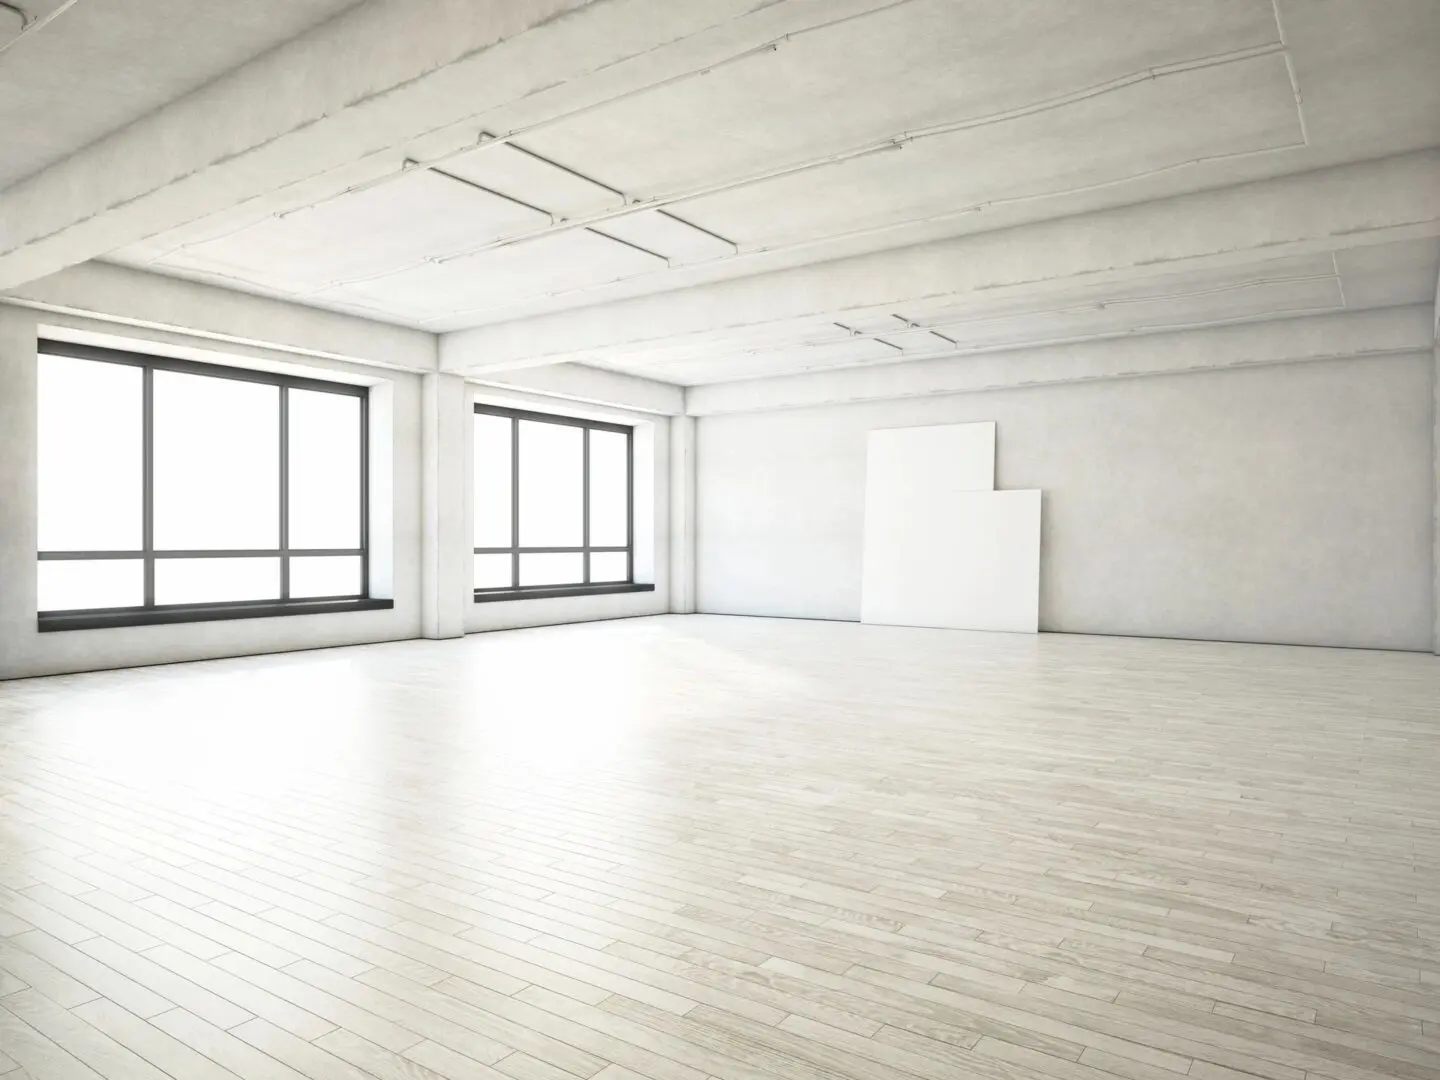 A large empty room with windows and white floors.